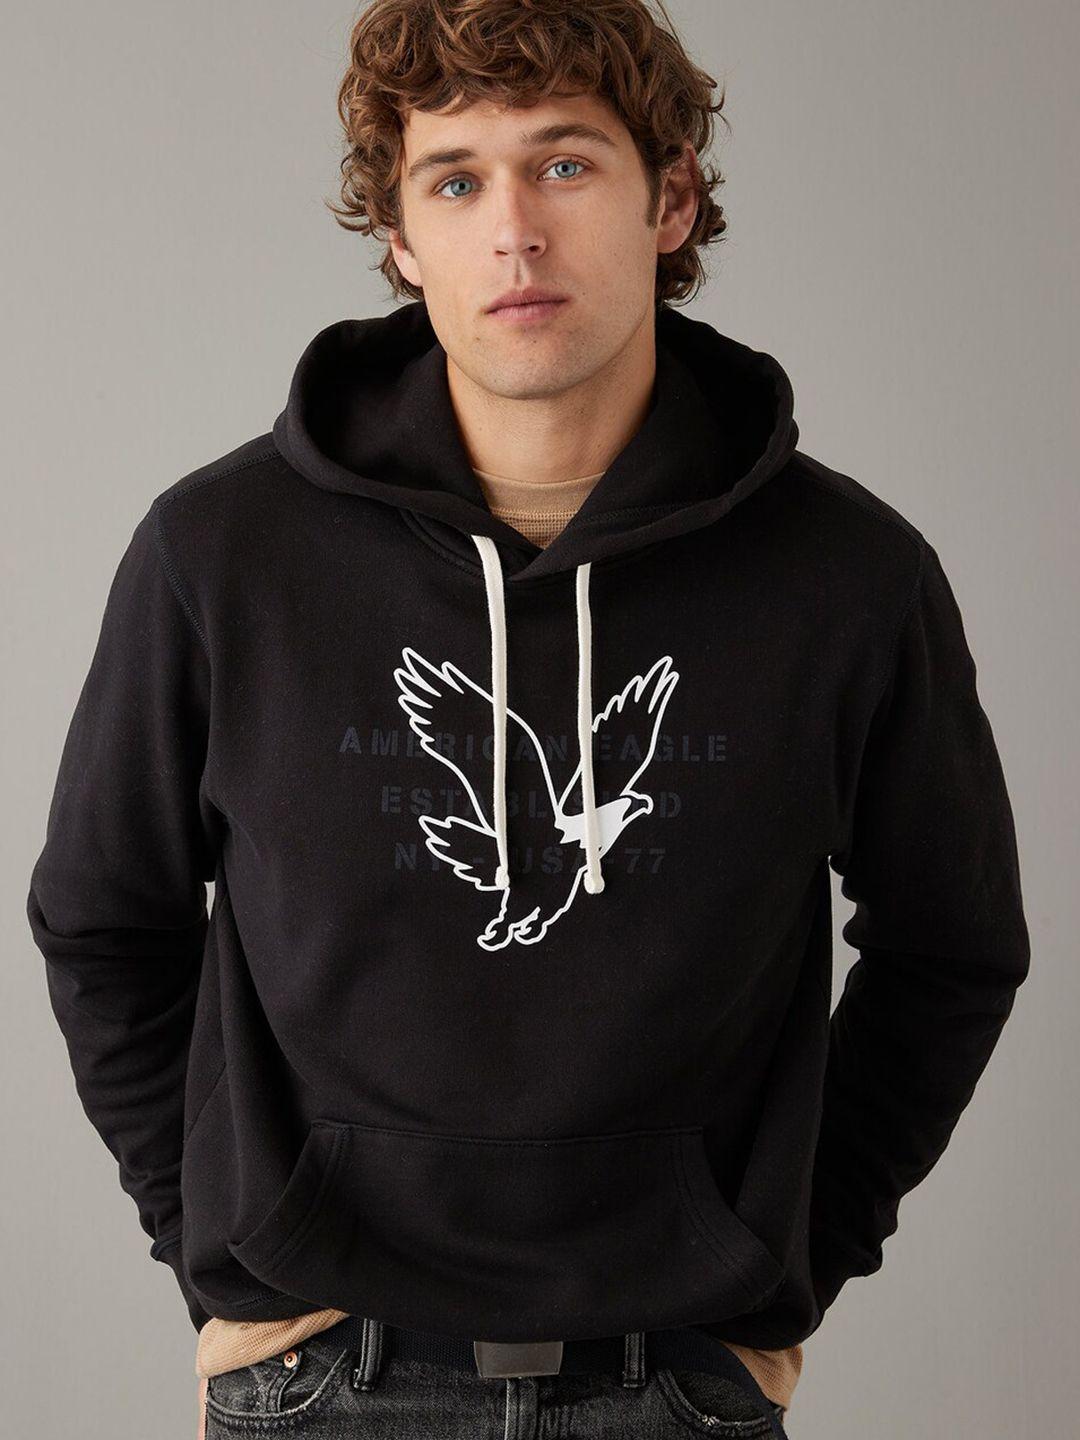 american eagle outfitters graphic printed hooded pullover sweatshirt